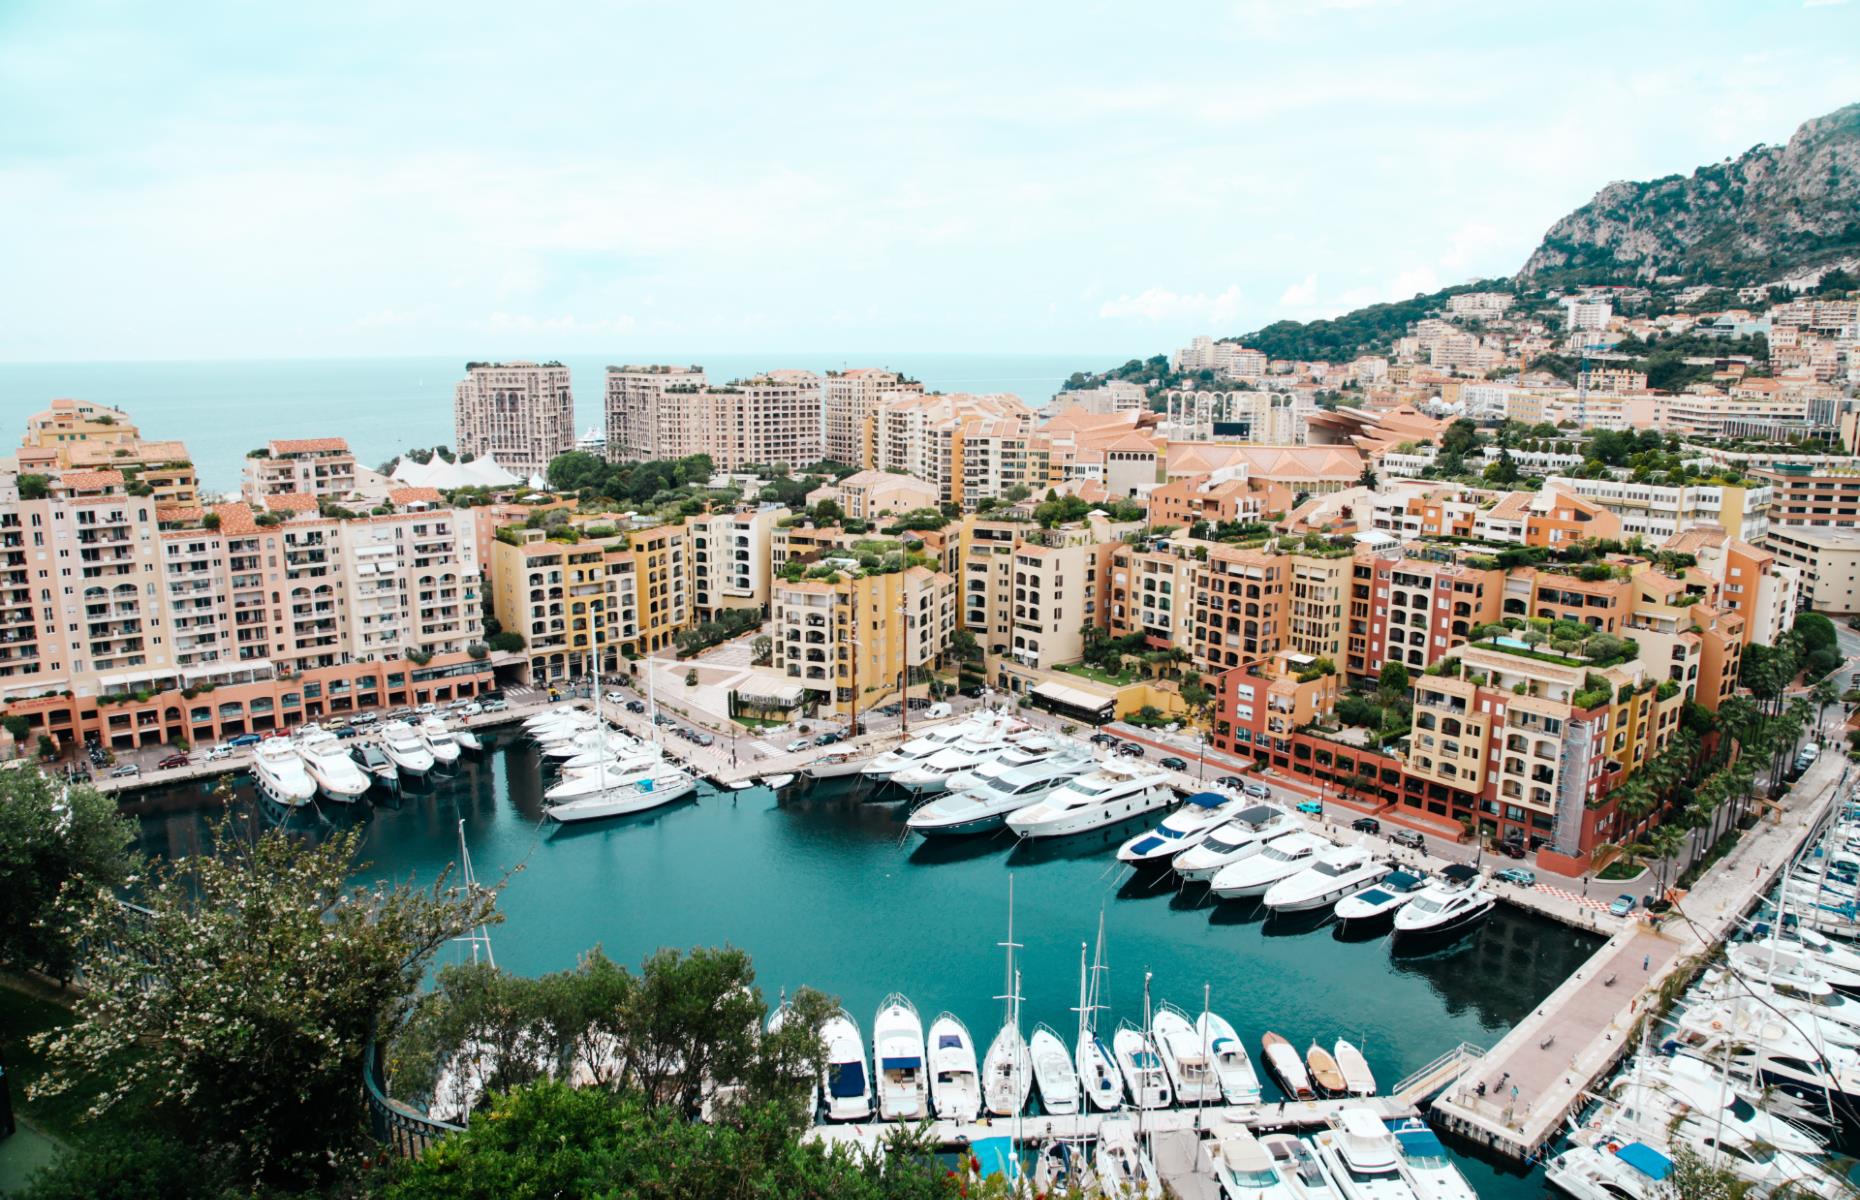 <p>In the heart of glamorous Monaco, the small, enclosed Port de Fontvieille certainly provides its fair share of eye candy when it comes to luxury yachts. Set against Monaco’s striking rocky hills, the waterside is also home to a number of bars, hotels and restaurants in which to kick back and gaze out at the view.</p>